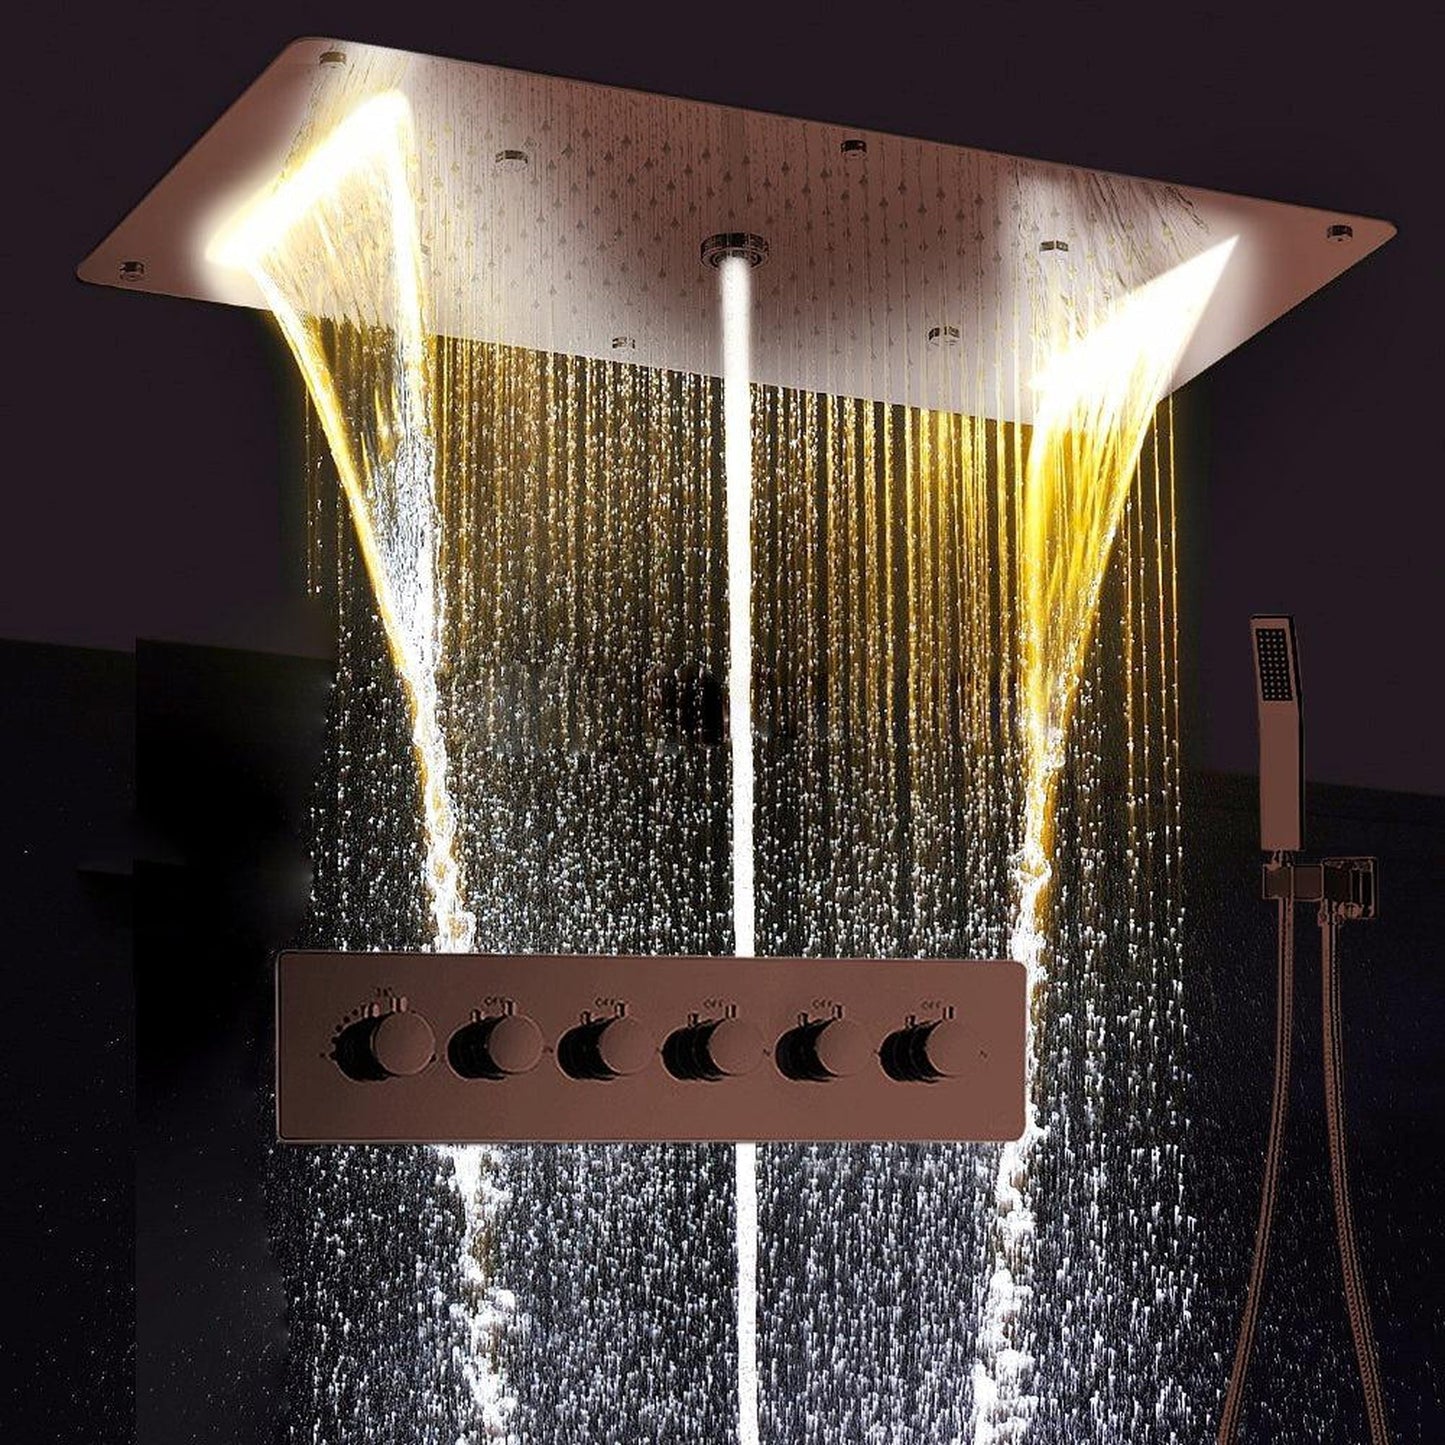 Fontana Creative Luxury Light Oil Rubbed Bronze Rectangular Amazing Relaxation Wide Ceiling Mounted LED Multiple Bath Shower System With Hand Shower